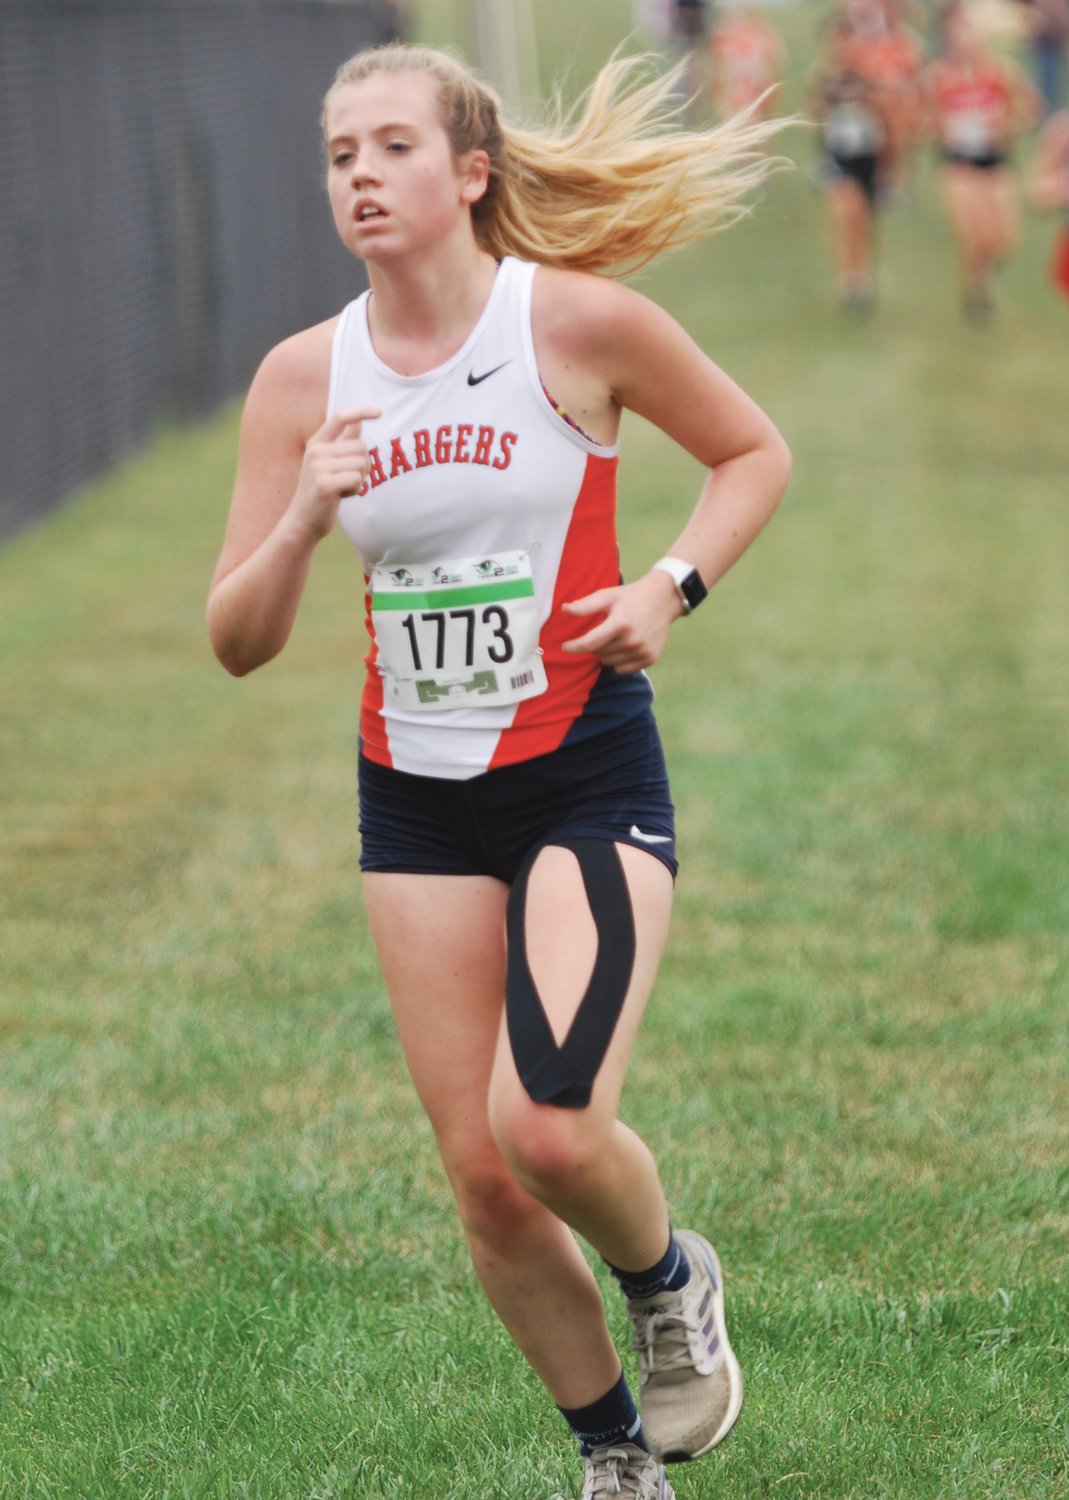 North Montgomery's Claire Bonwell led the Chargers with a 65th-place finish in a time of 26:39.